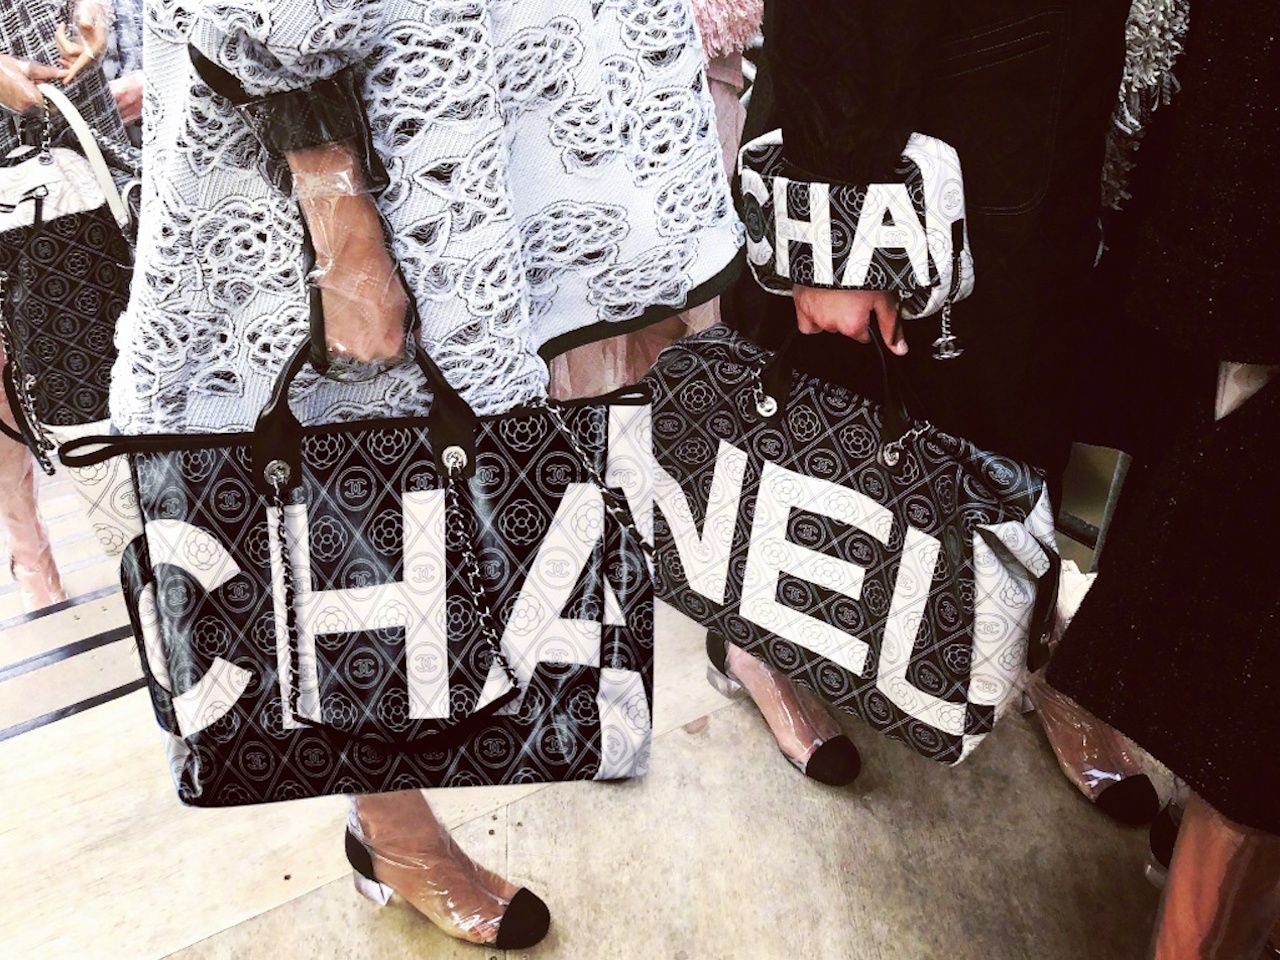 What Does "Going Digital in China" Mean in Light of Chanel's Resistance?